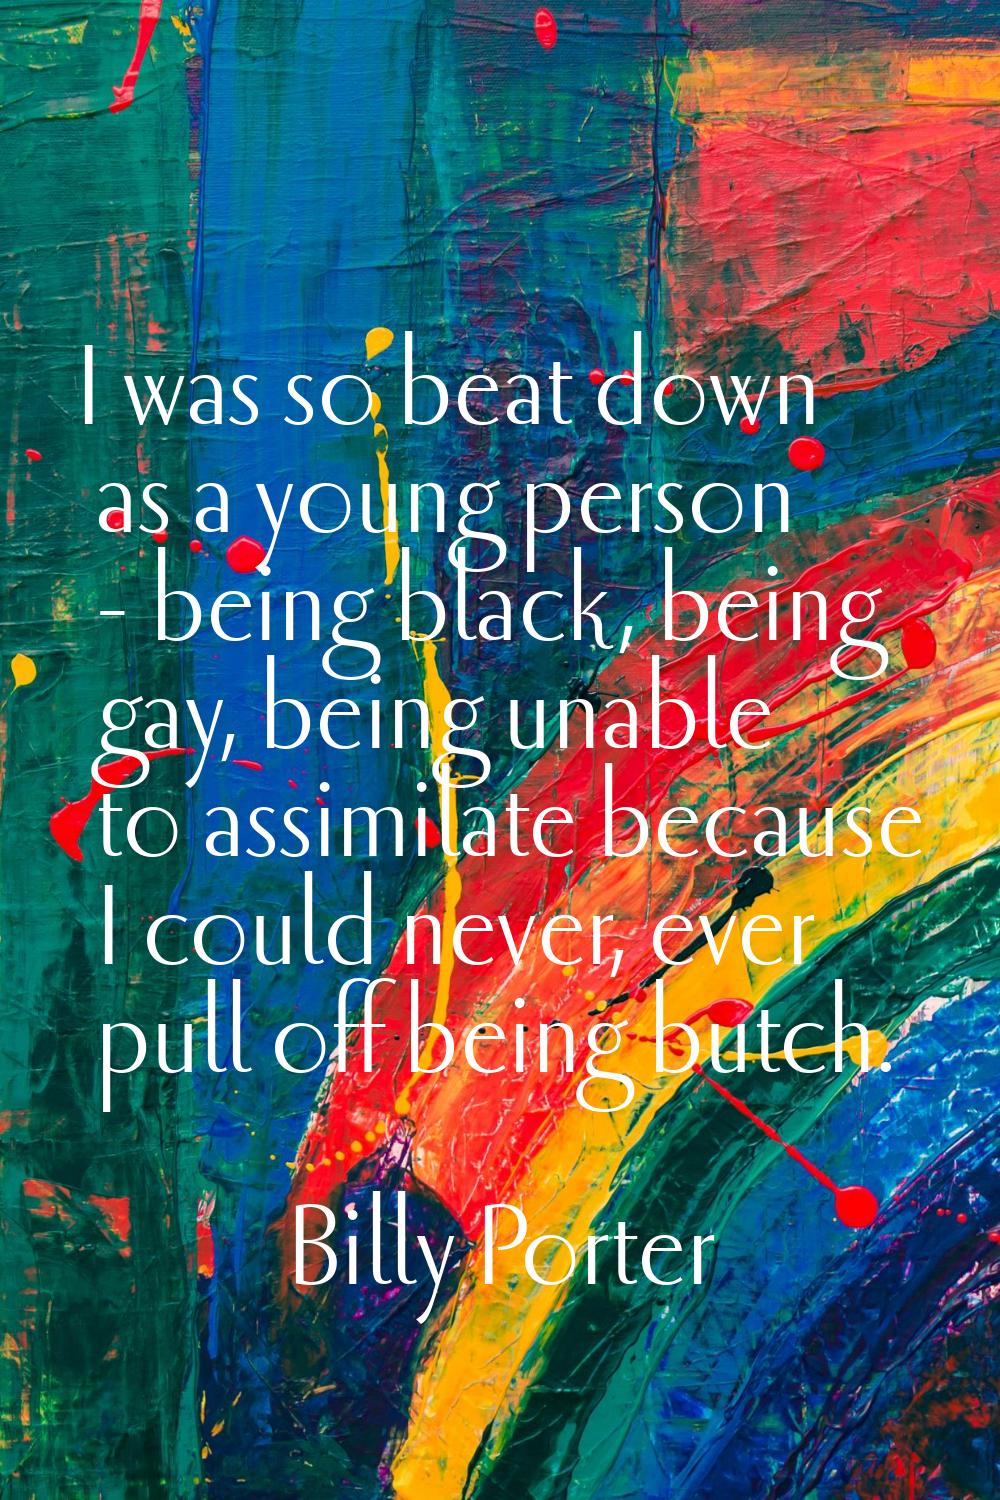 I was so beat down as a young person - being black, being gay, being unable to assimilate because I